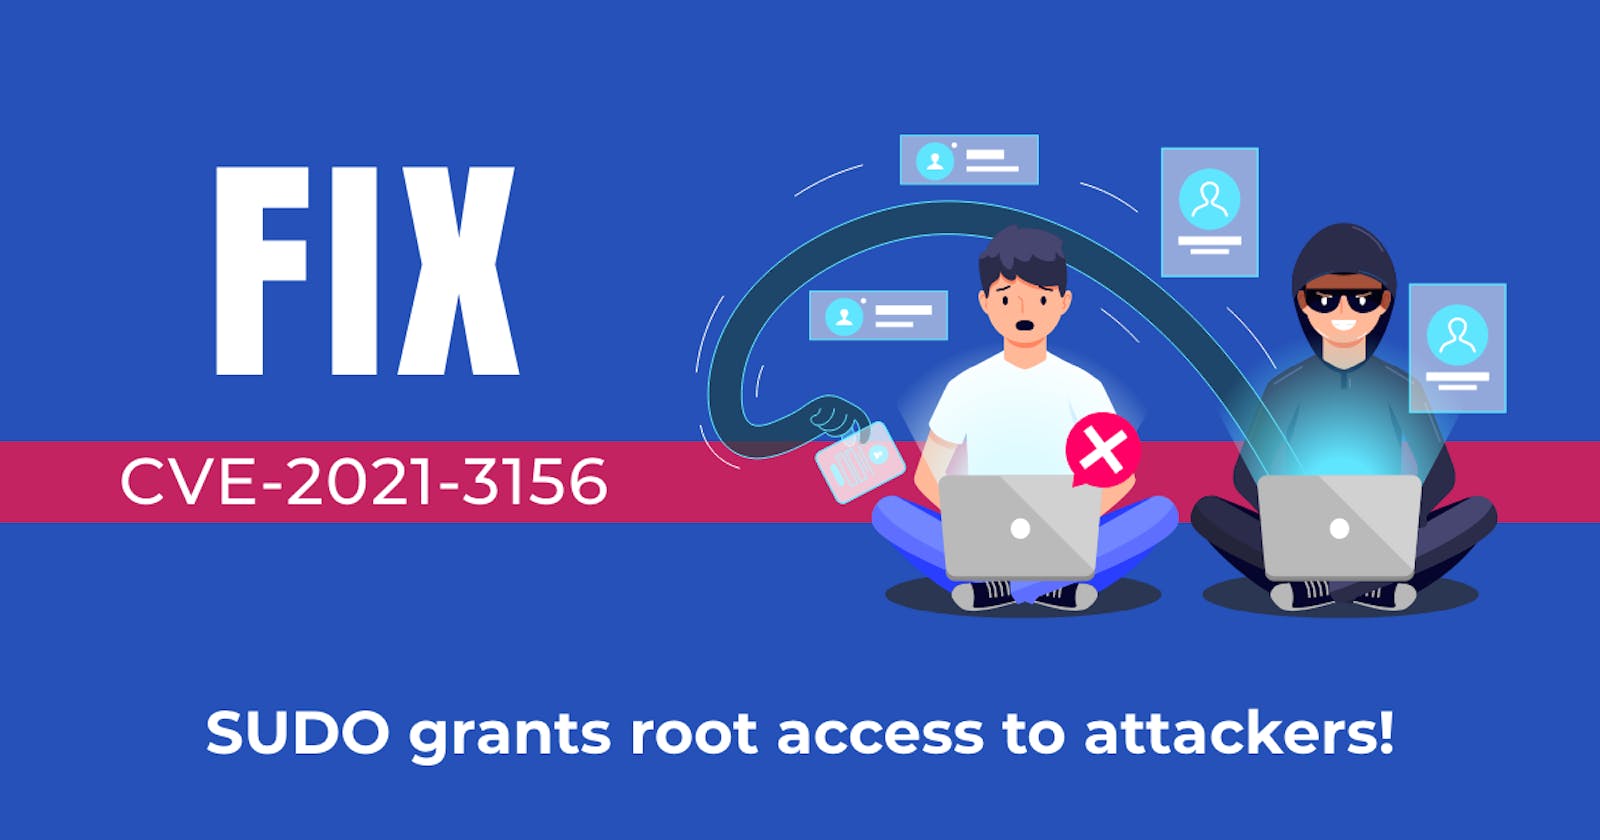 CVE-2021-3156 - SUDO grants root access to attackers! Here is the fix - package update details for various Operating systems